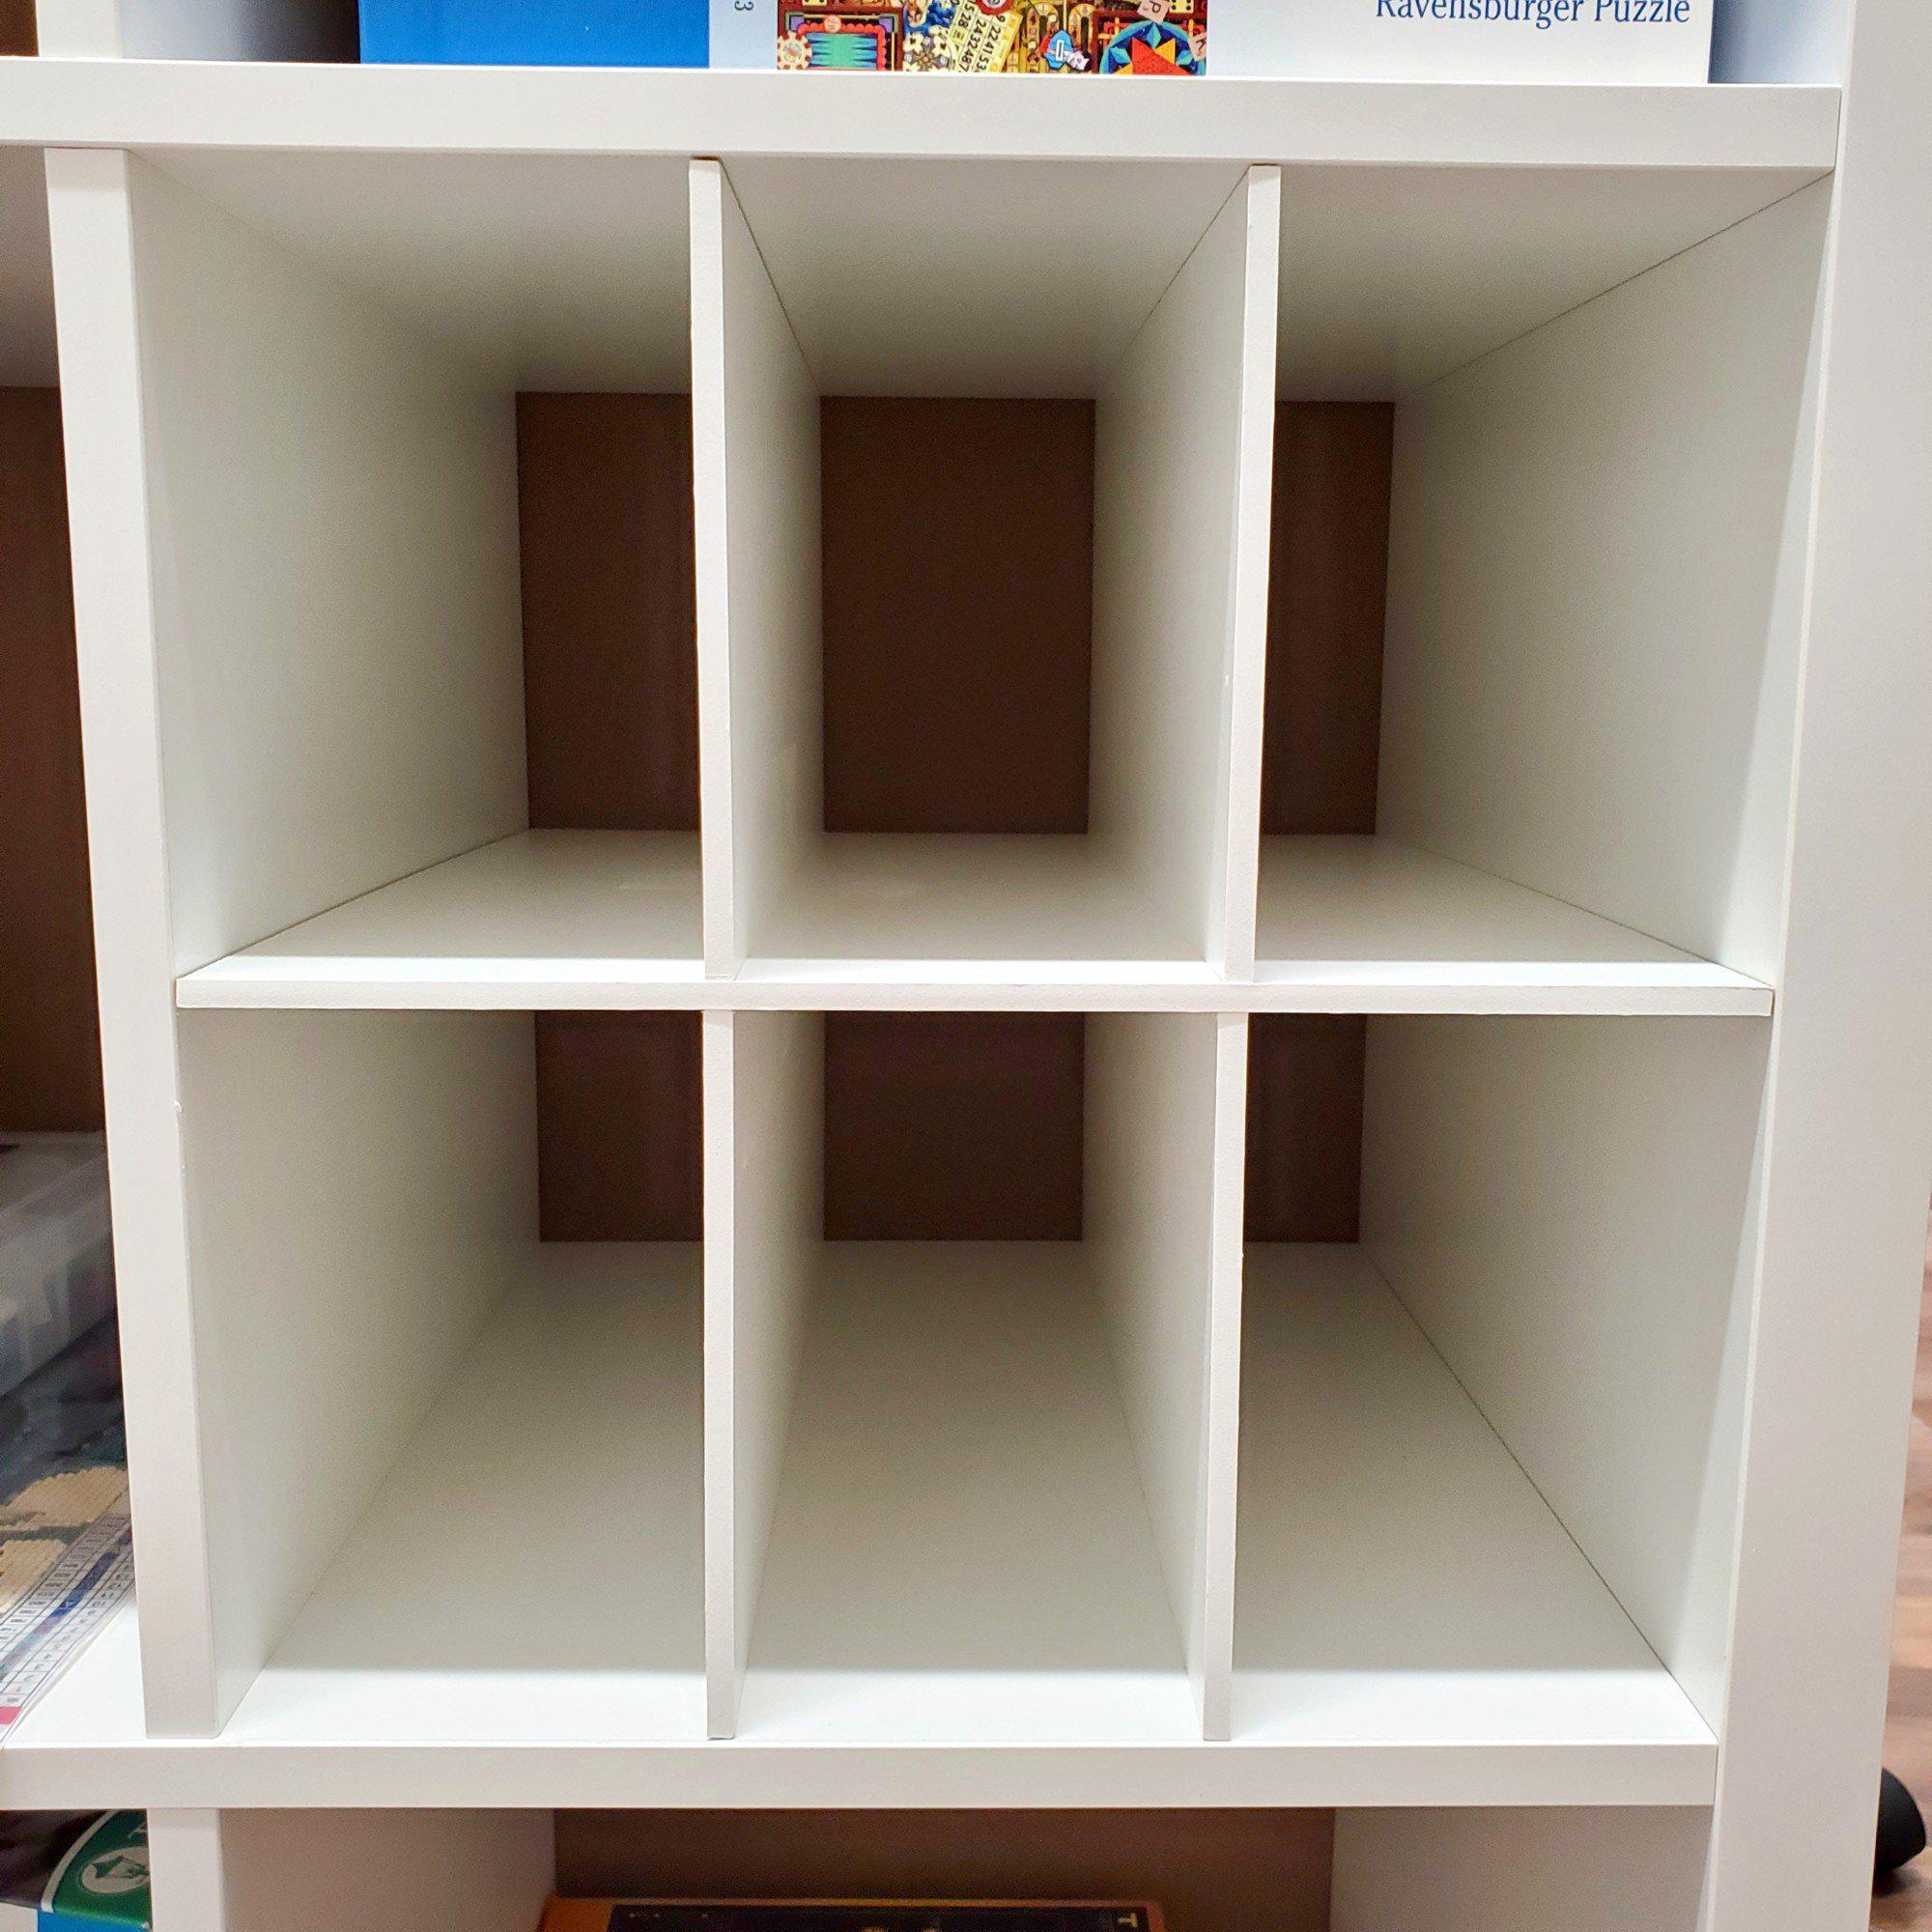 6 Cubby Cube Insert for Cube Storage Shelves, White-The Steady Hand